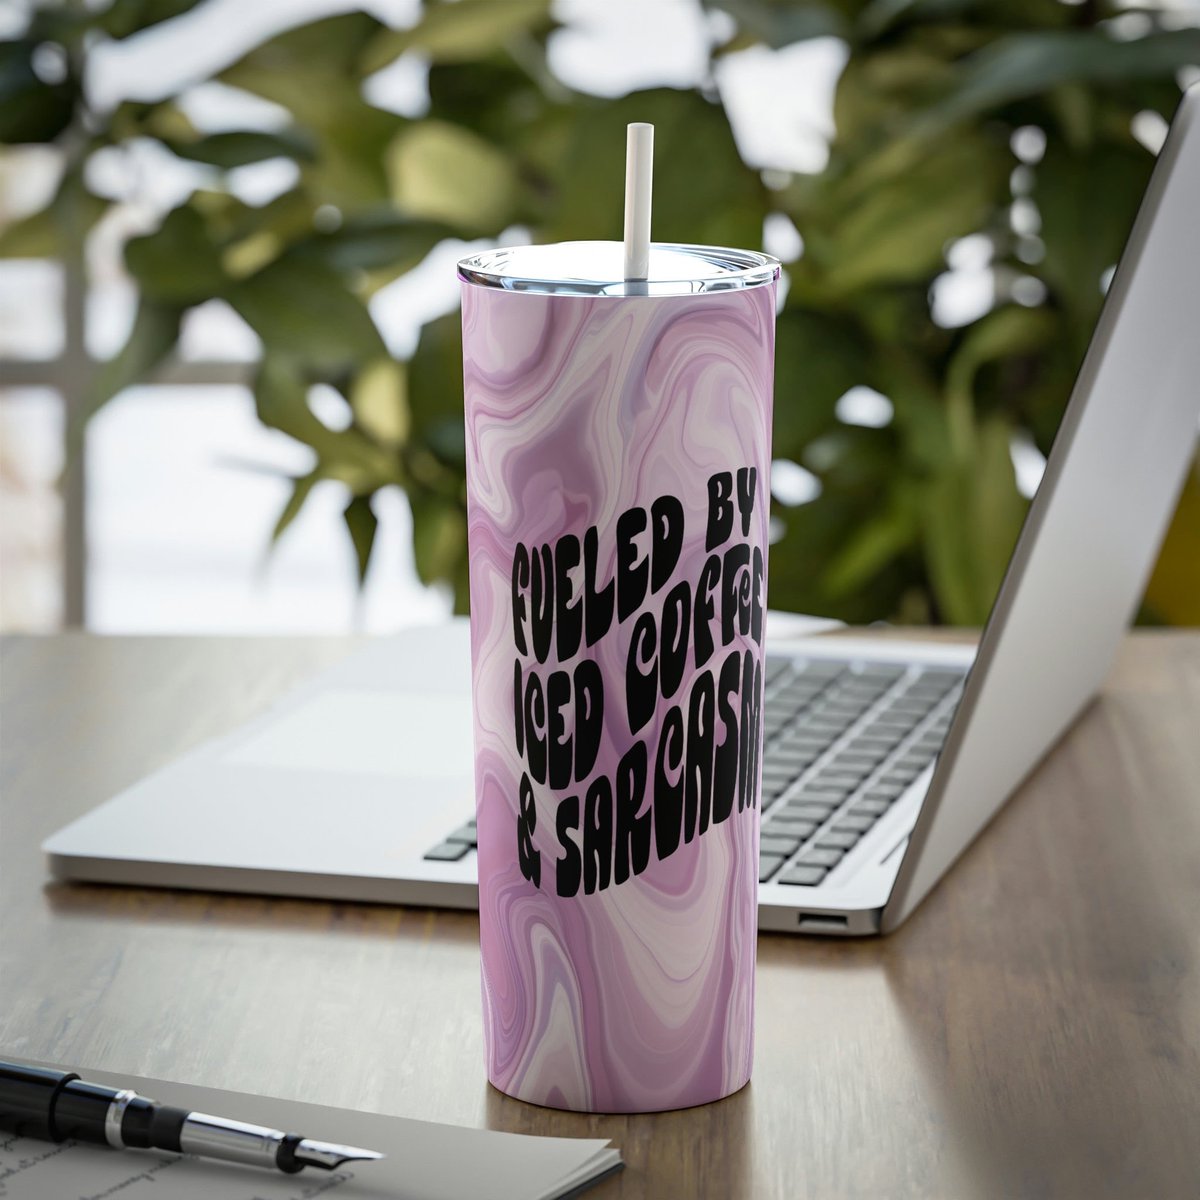 Excited to share this from my #etsy shop: Marble Fueled by Iced Coffee and Sarcasm Skinny Steel Tumbler with Straw, 20oz, Iced Coffee, Mothers Day Gift, Gifts for her #icedcoffeecup #fueledbycoffee #coffeeandsarcasm #marbletumbler #mothersdaygift etsy.me/3MqHCza